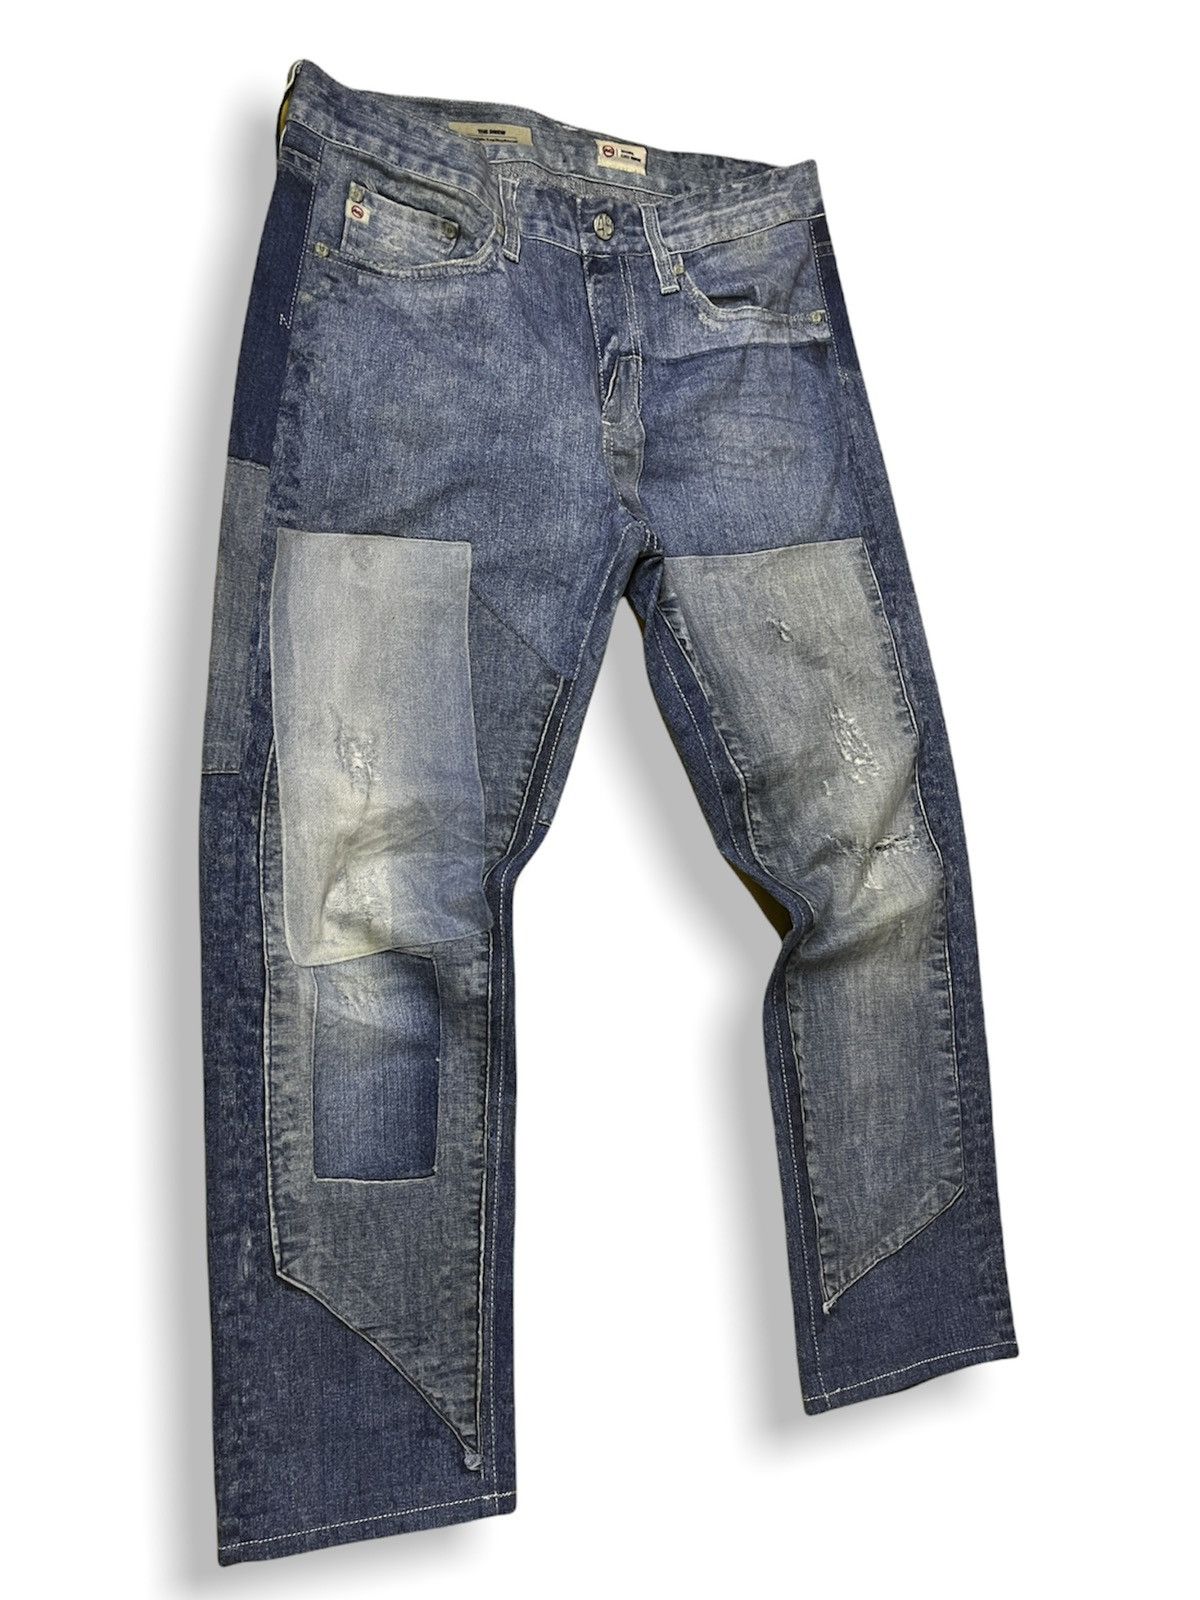 DISTRESSED PRINTED AG ADRIANO GOLDSCHMIED DENIM PANTS - 4